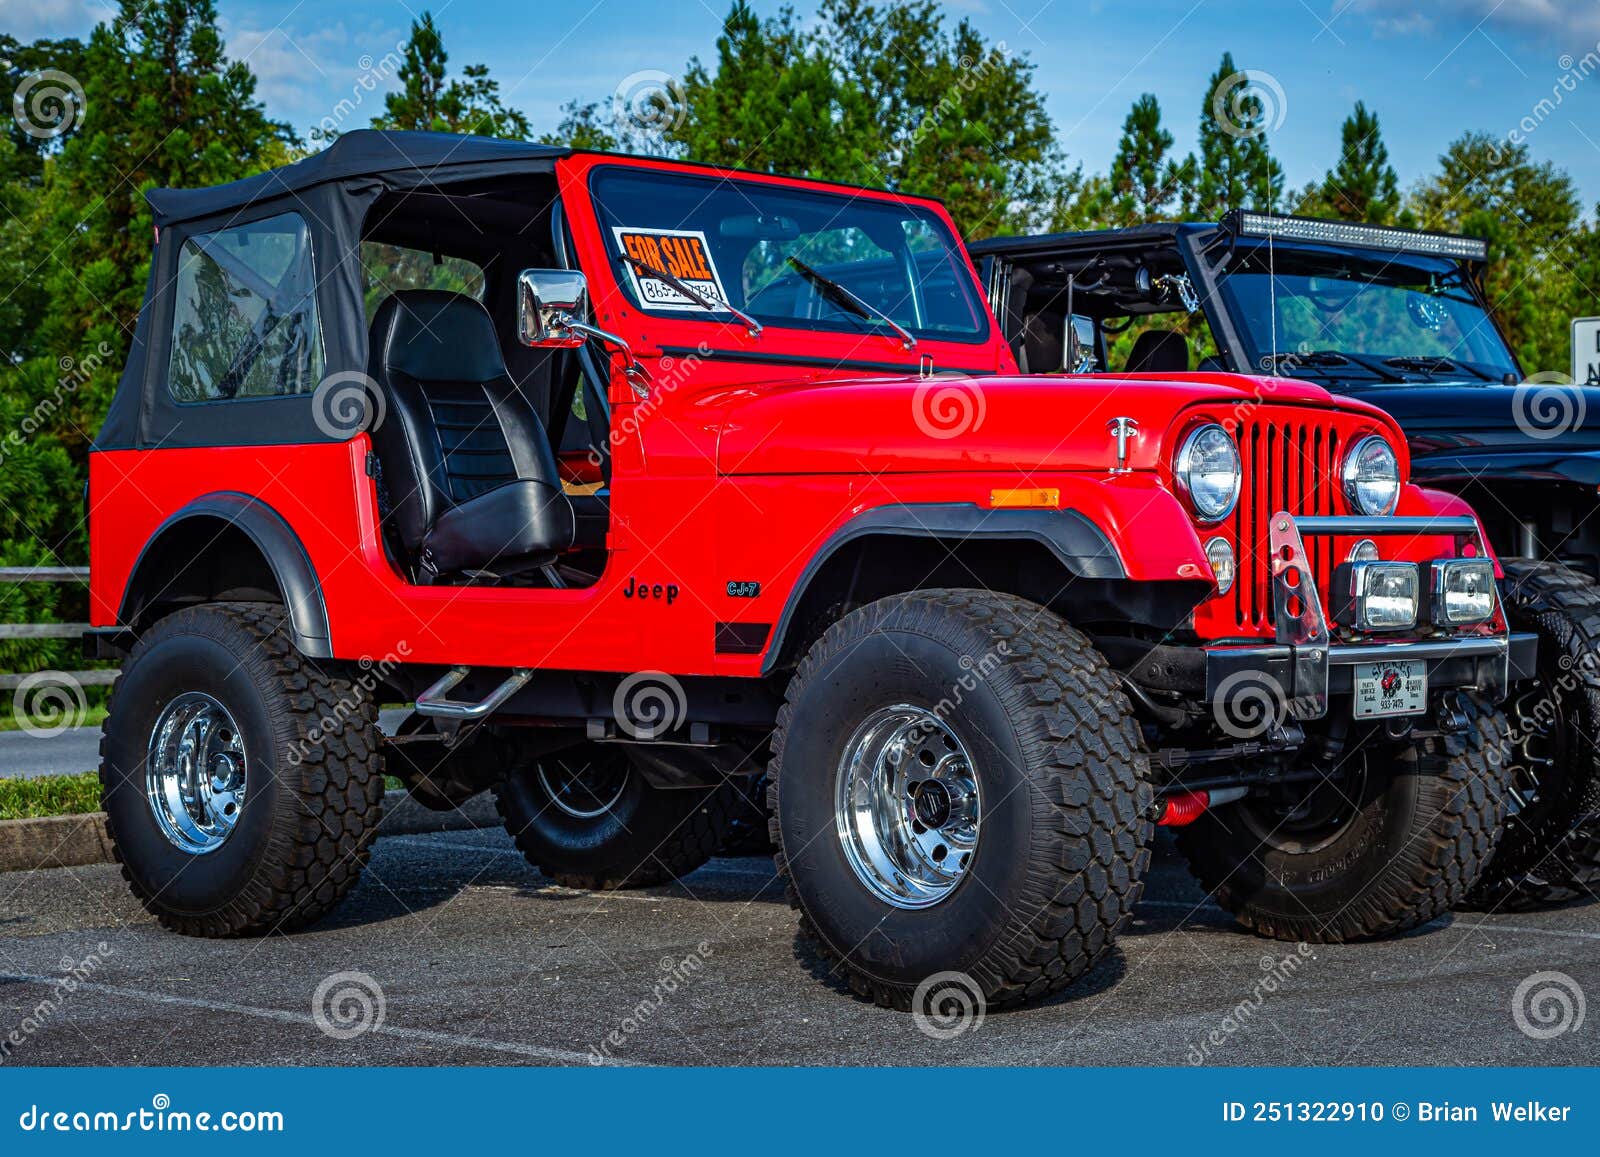 What Are the Differences Between the Jeep YJ TJ and CJ  Louisville CDJR